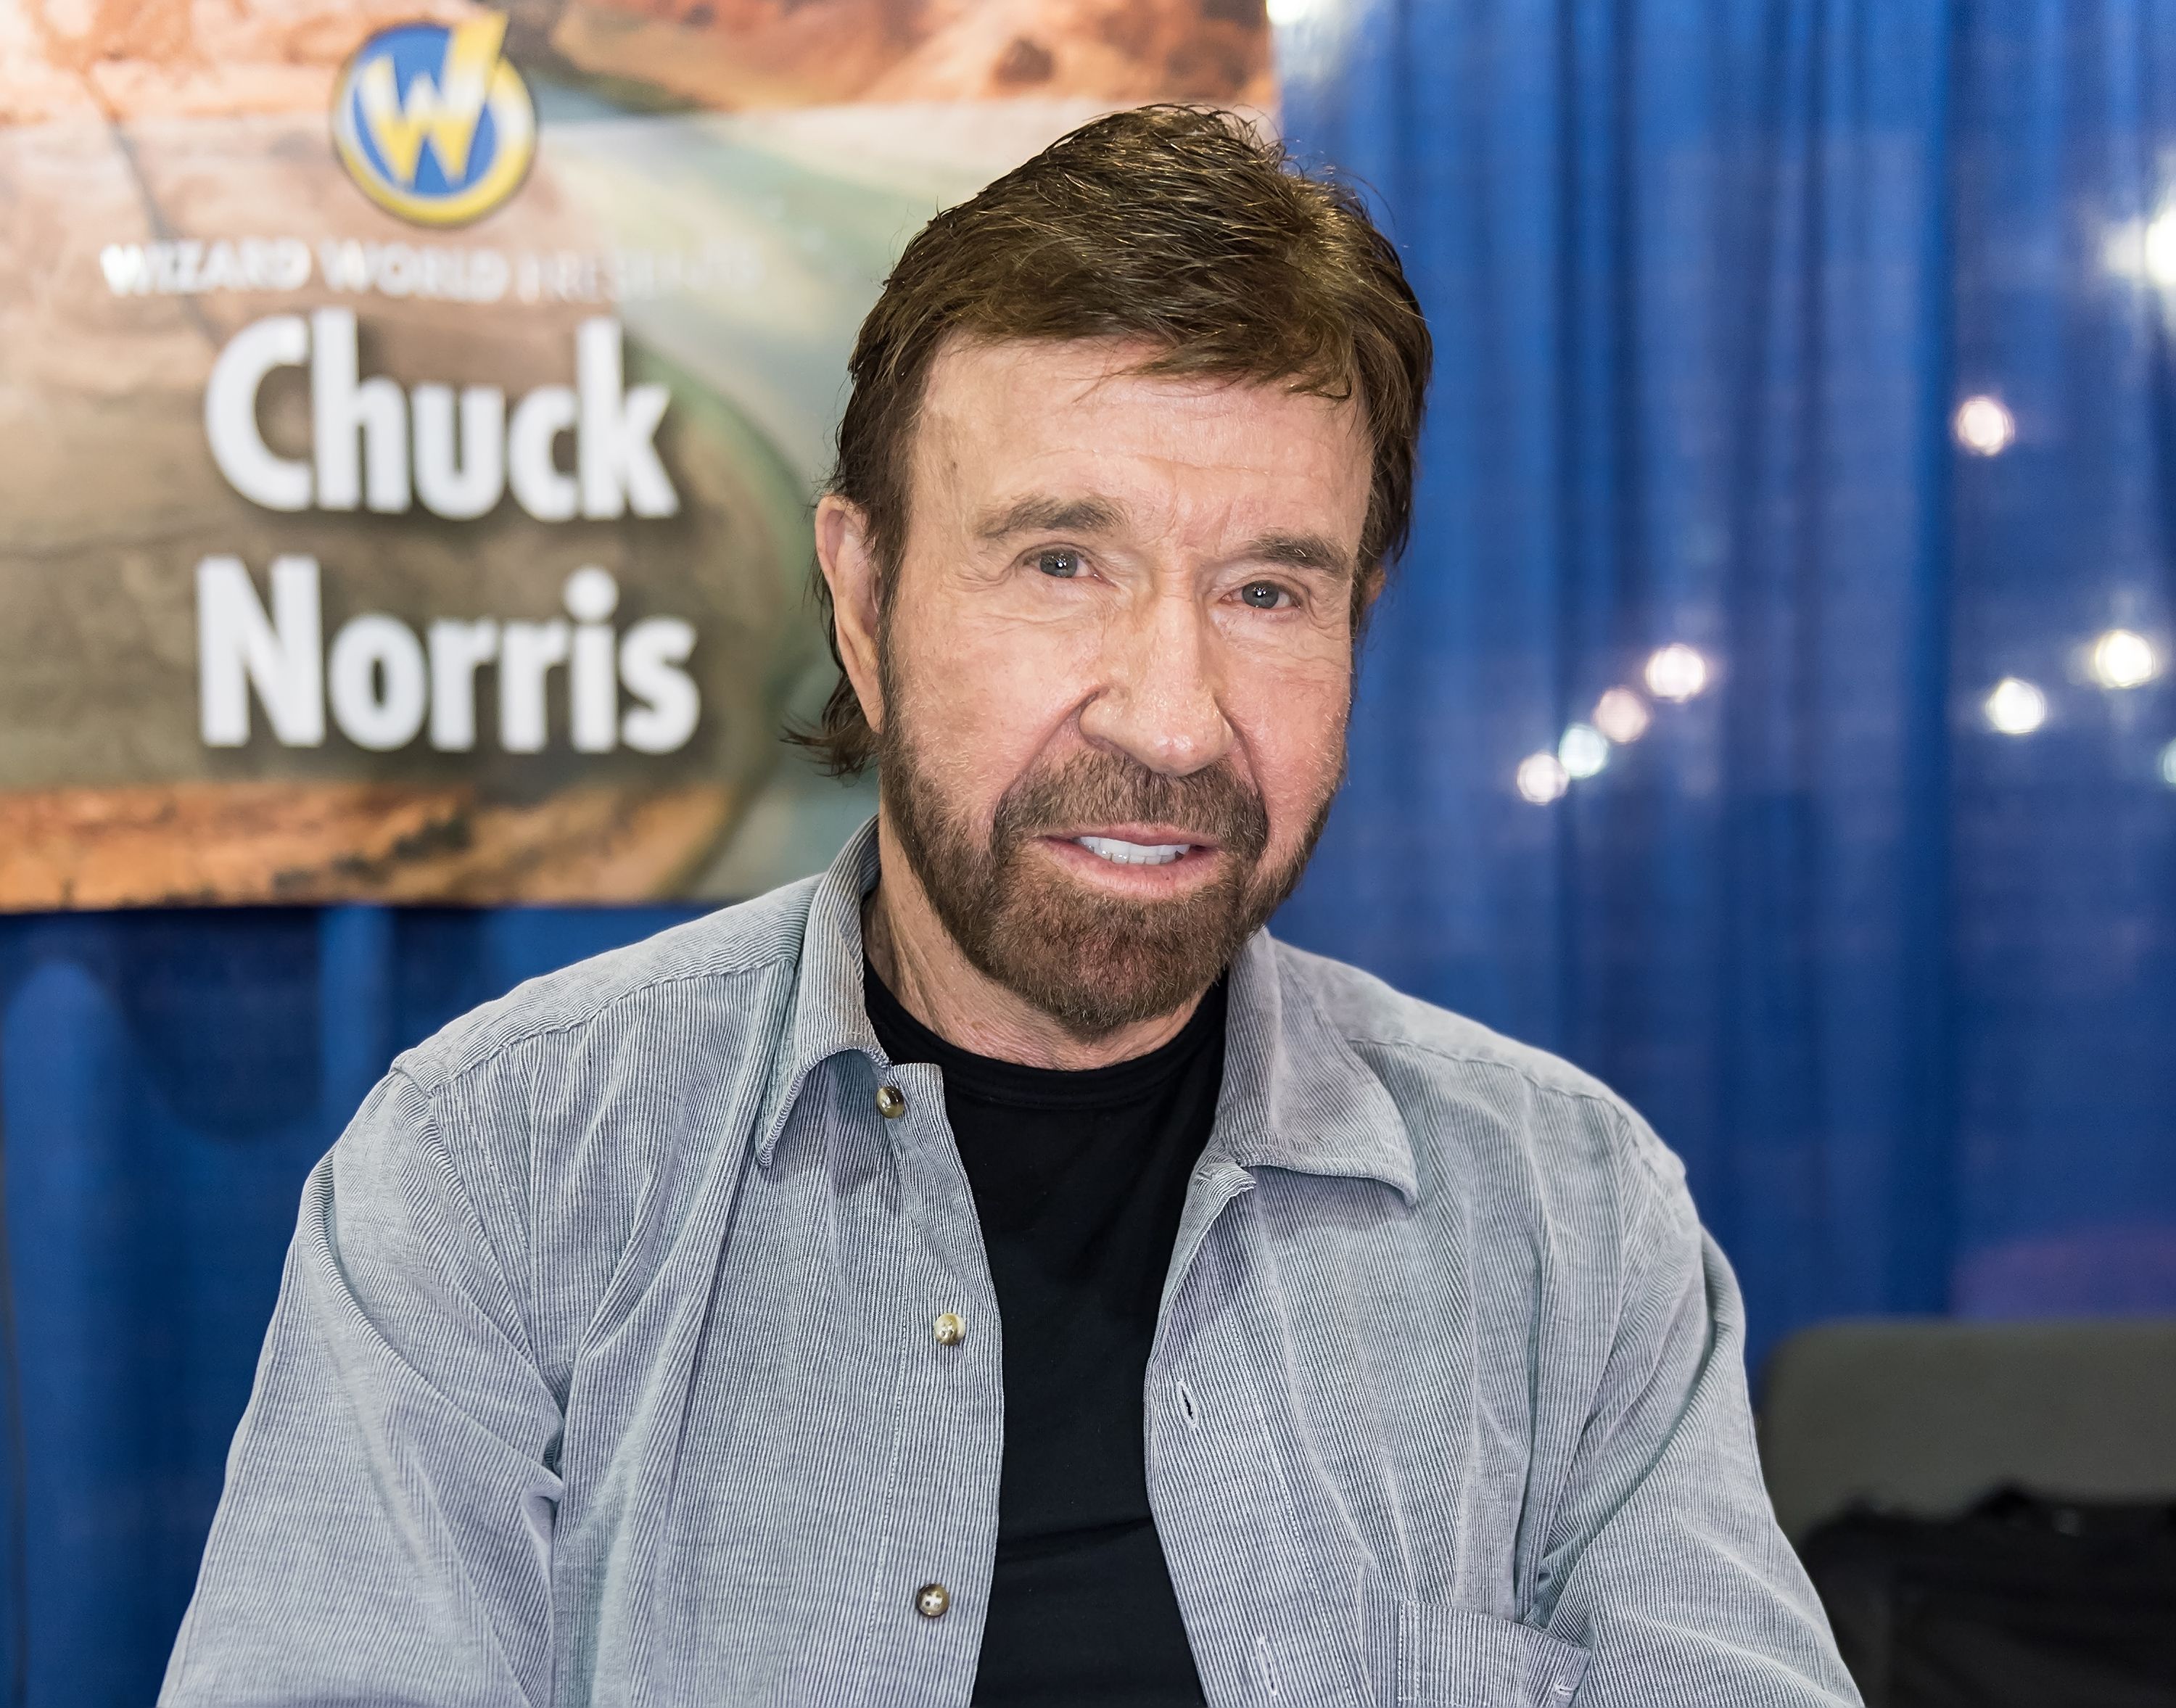 Chuck Norris make his Wizard World Comic Con debut during Wizard World Comic Con Philadelphia 2017 - Day 3 at Pennsylvania Convention Center on June 3, 2017 in Philadelphia, Pennsylvania. | Source: Getty Images